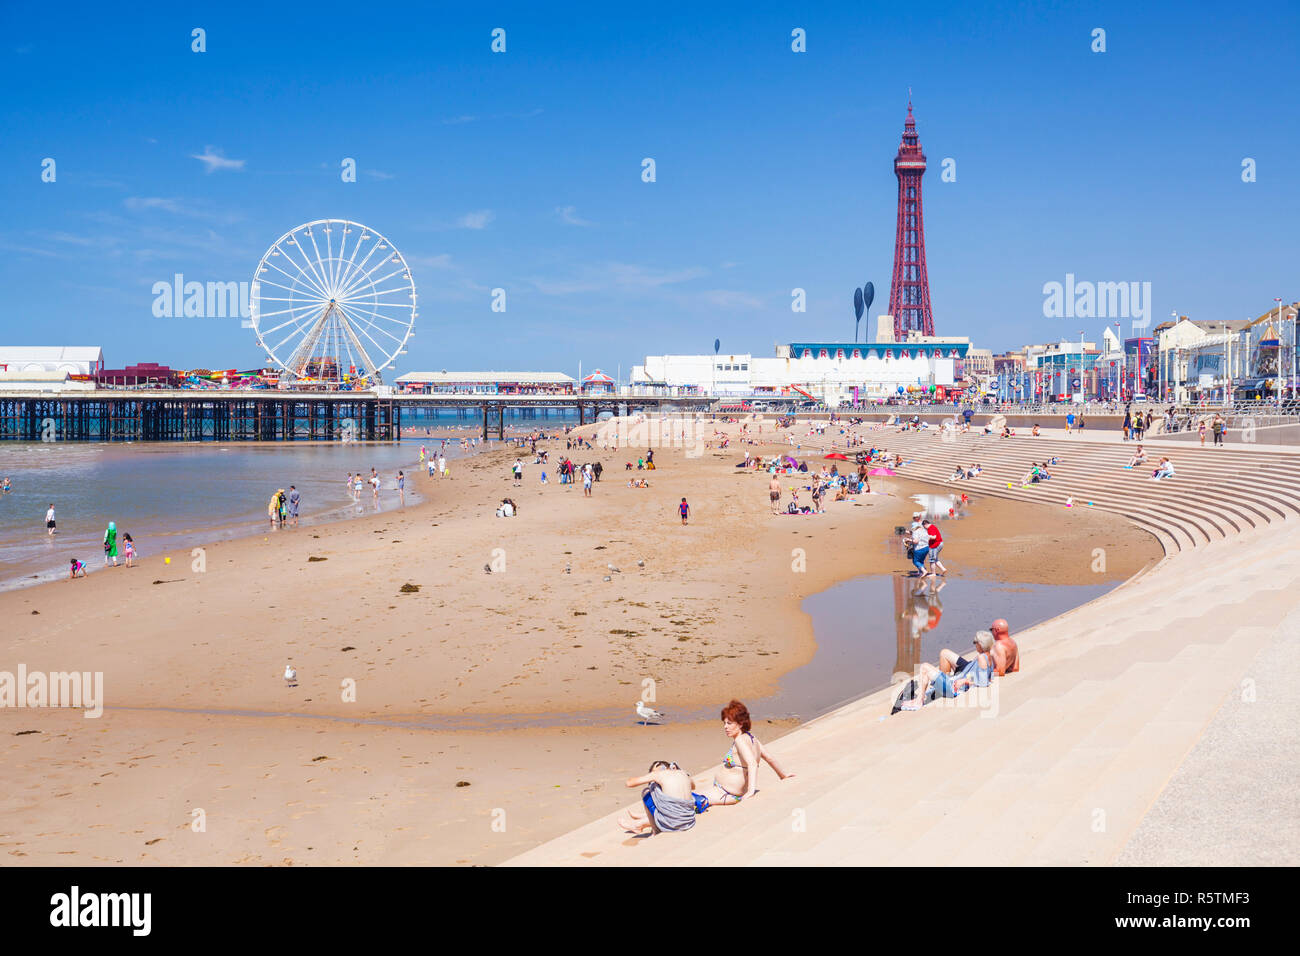 People on the sandy beach at Blackpool beach summer with Blackpool tower central pier and promenade Blackpool Lancashire England UK GB Europe Stock Photo